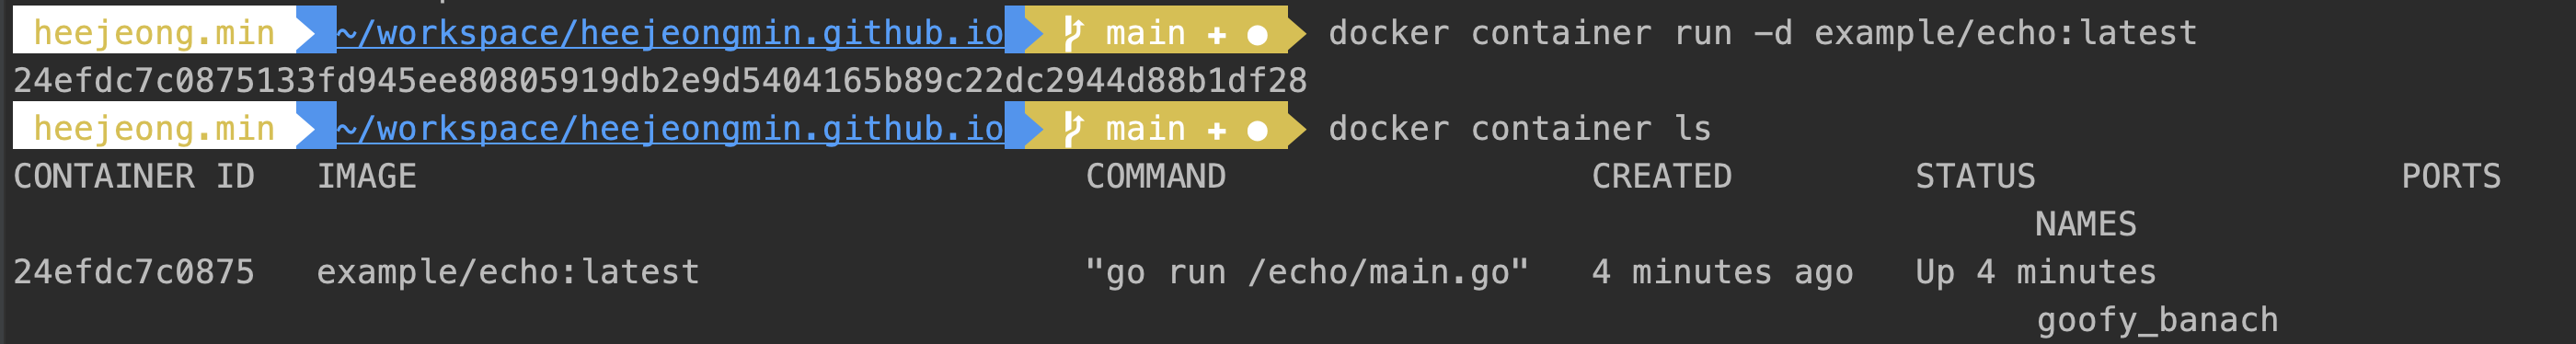 docker_container_run_background.png